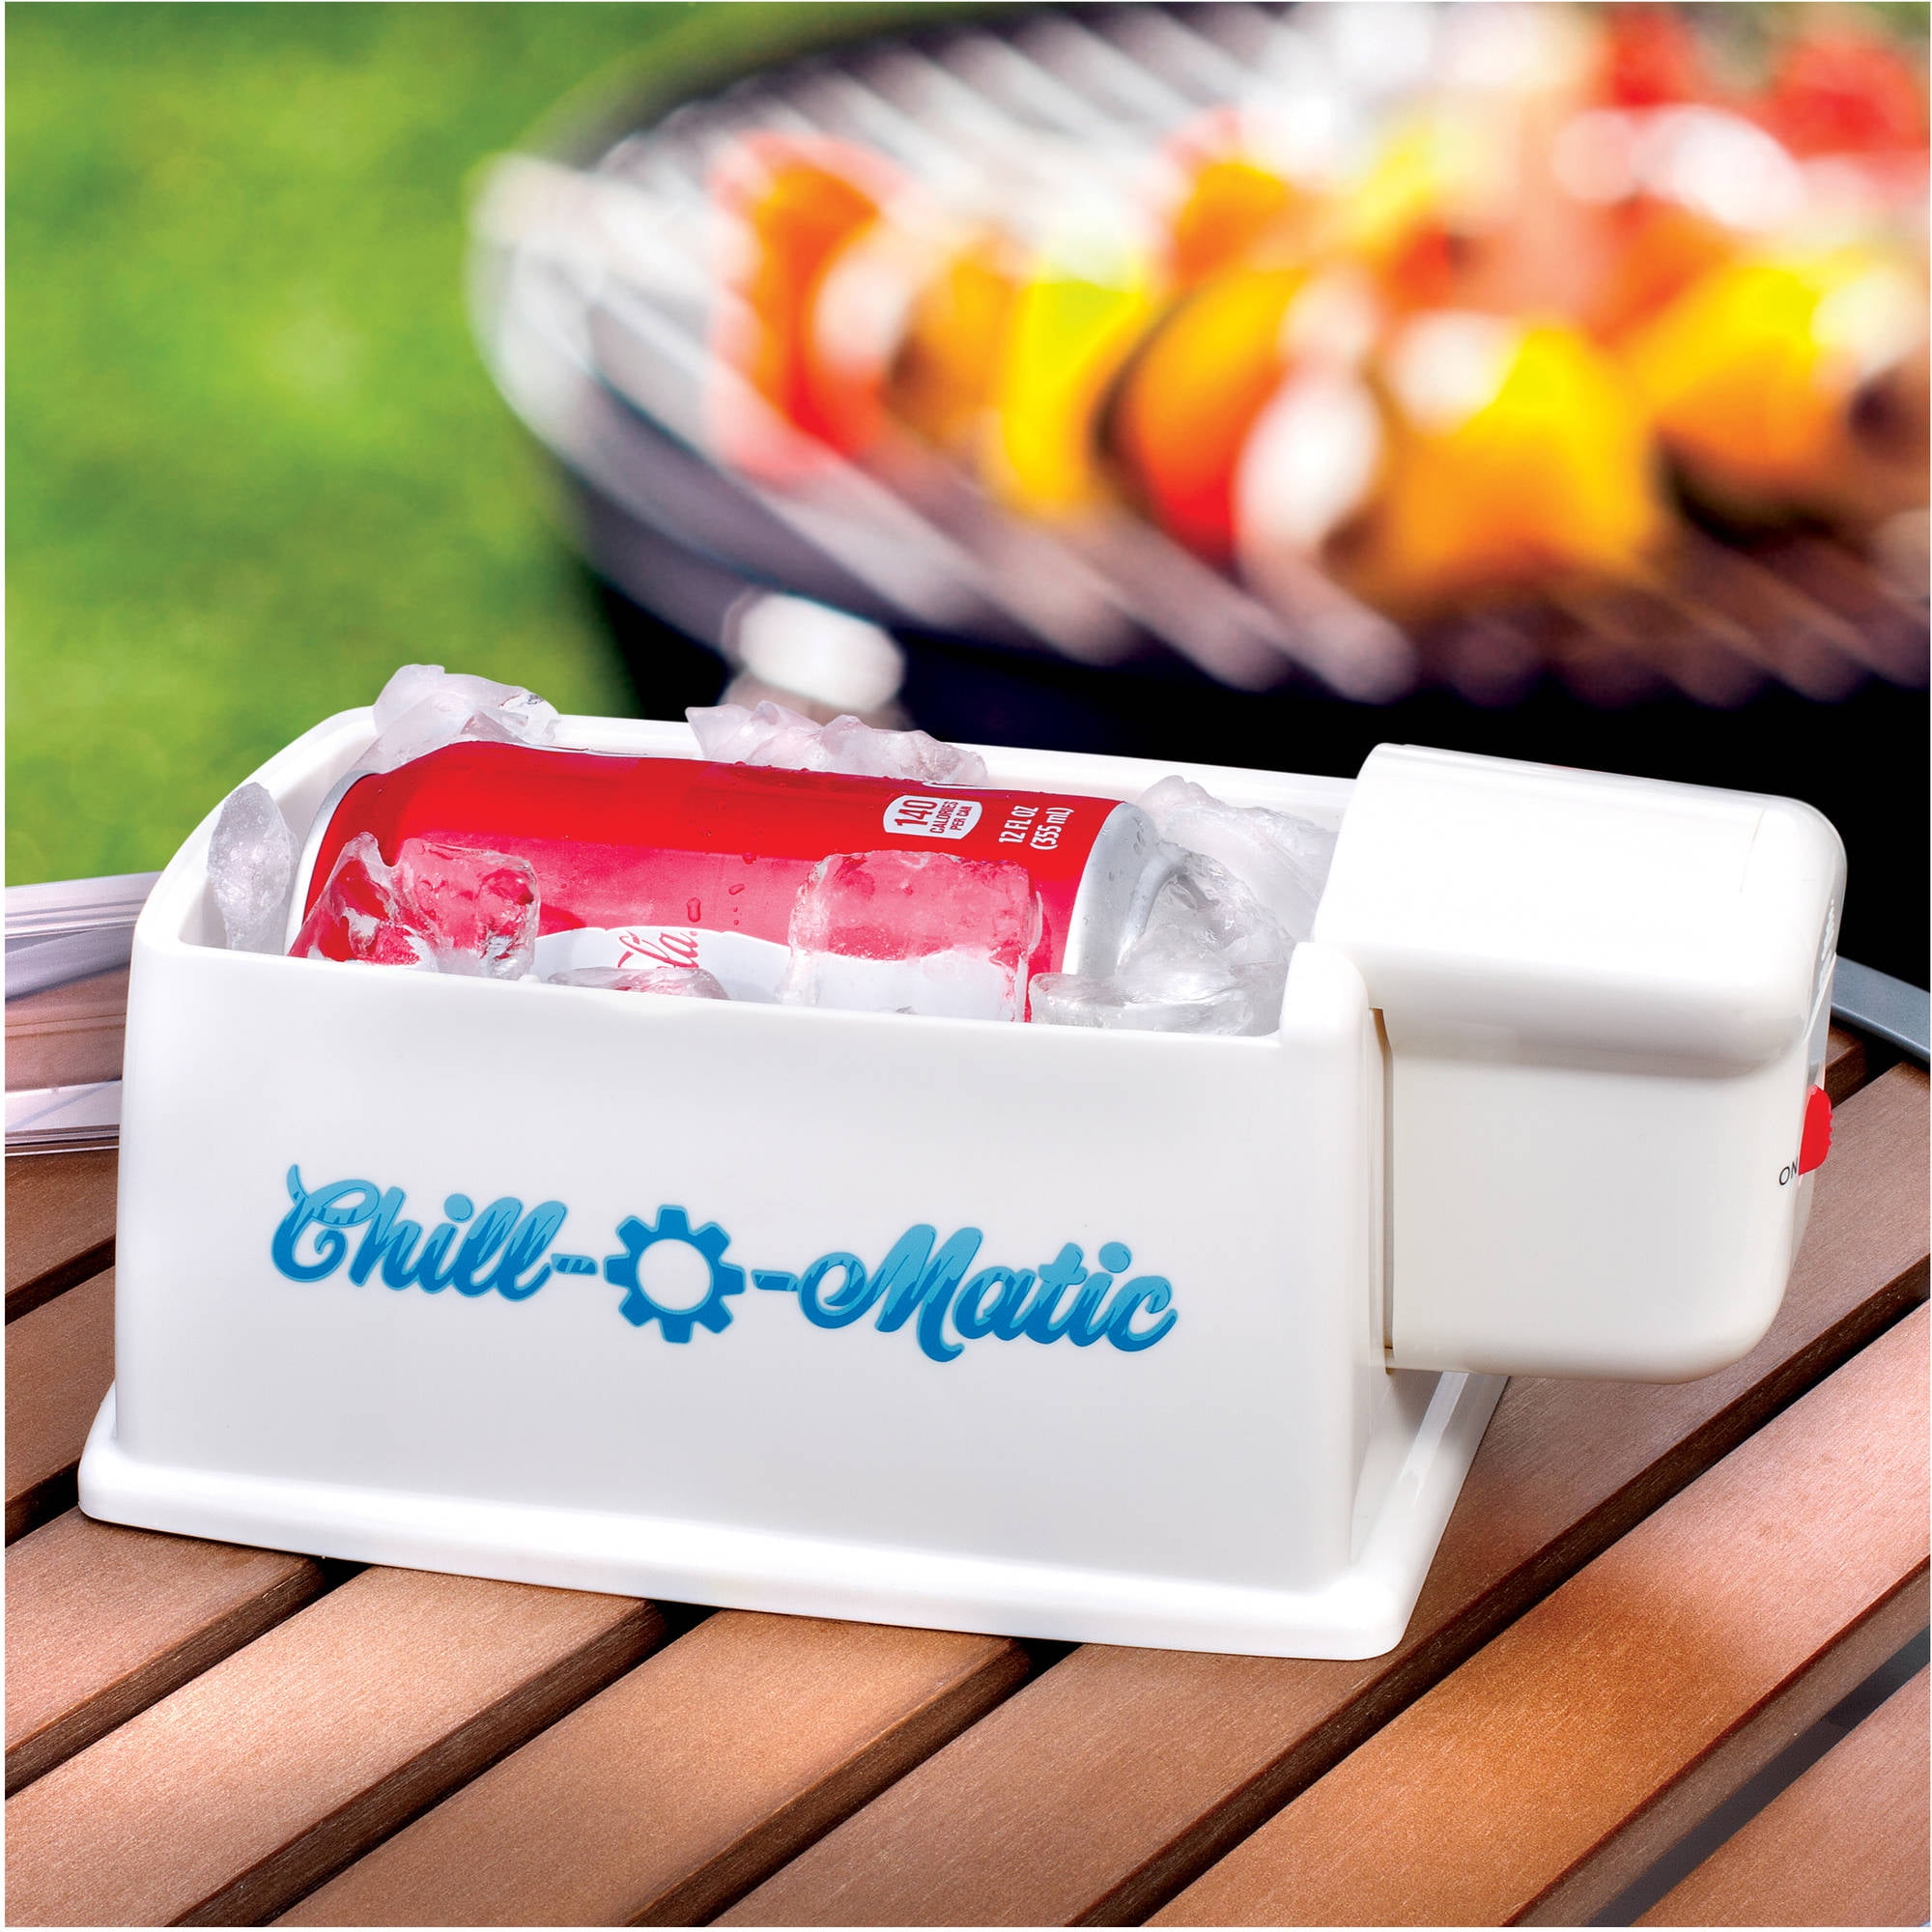 Chill-o-matic Drink Chiller - Small Kitchen Appliances - Eden, New